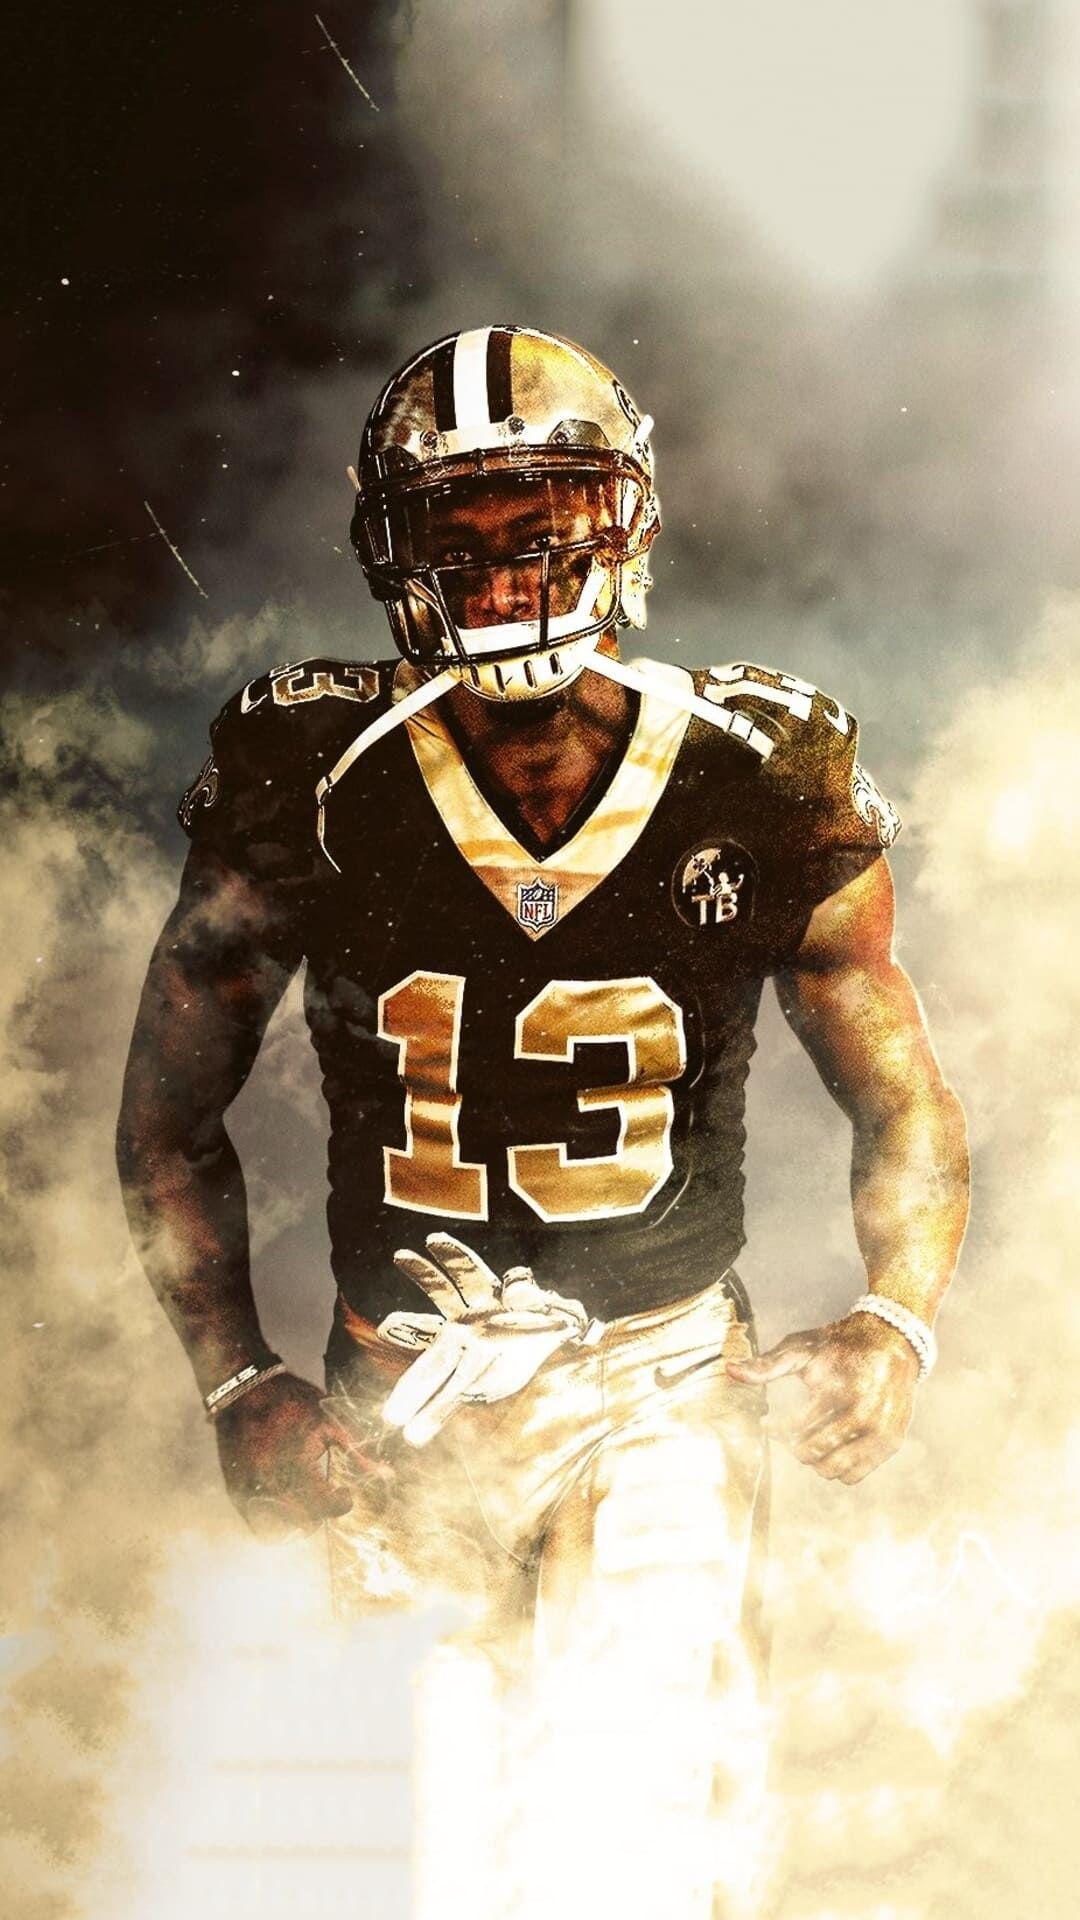 Some good saints wallpapers since they released the media day pics   rSaints